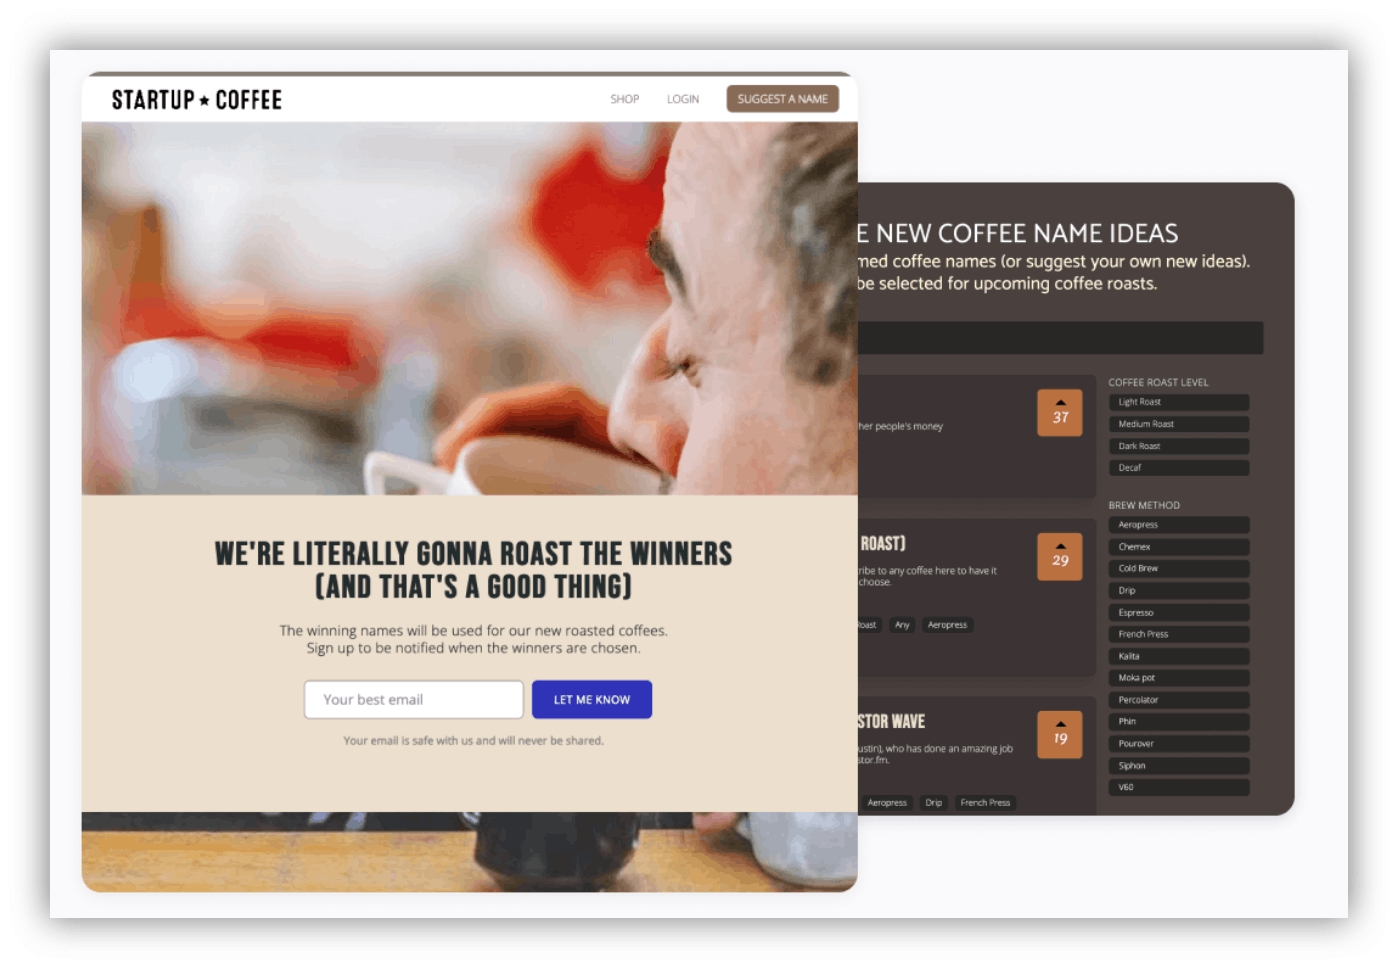 resoucre directory startup coffee